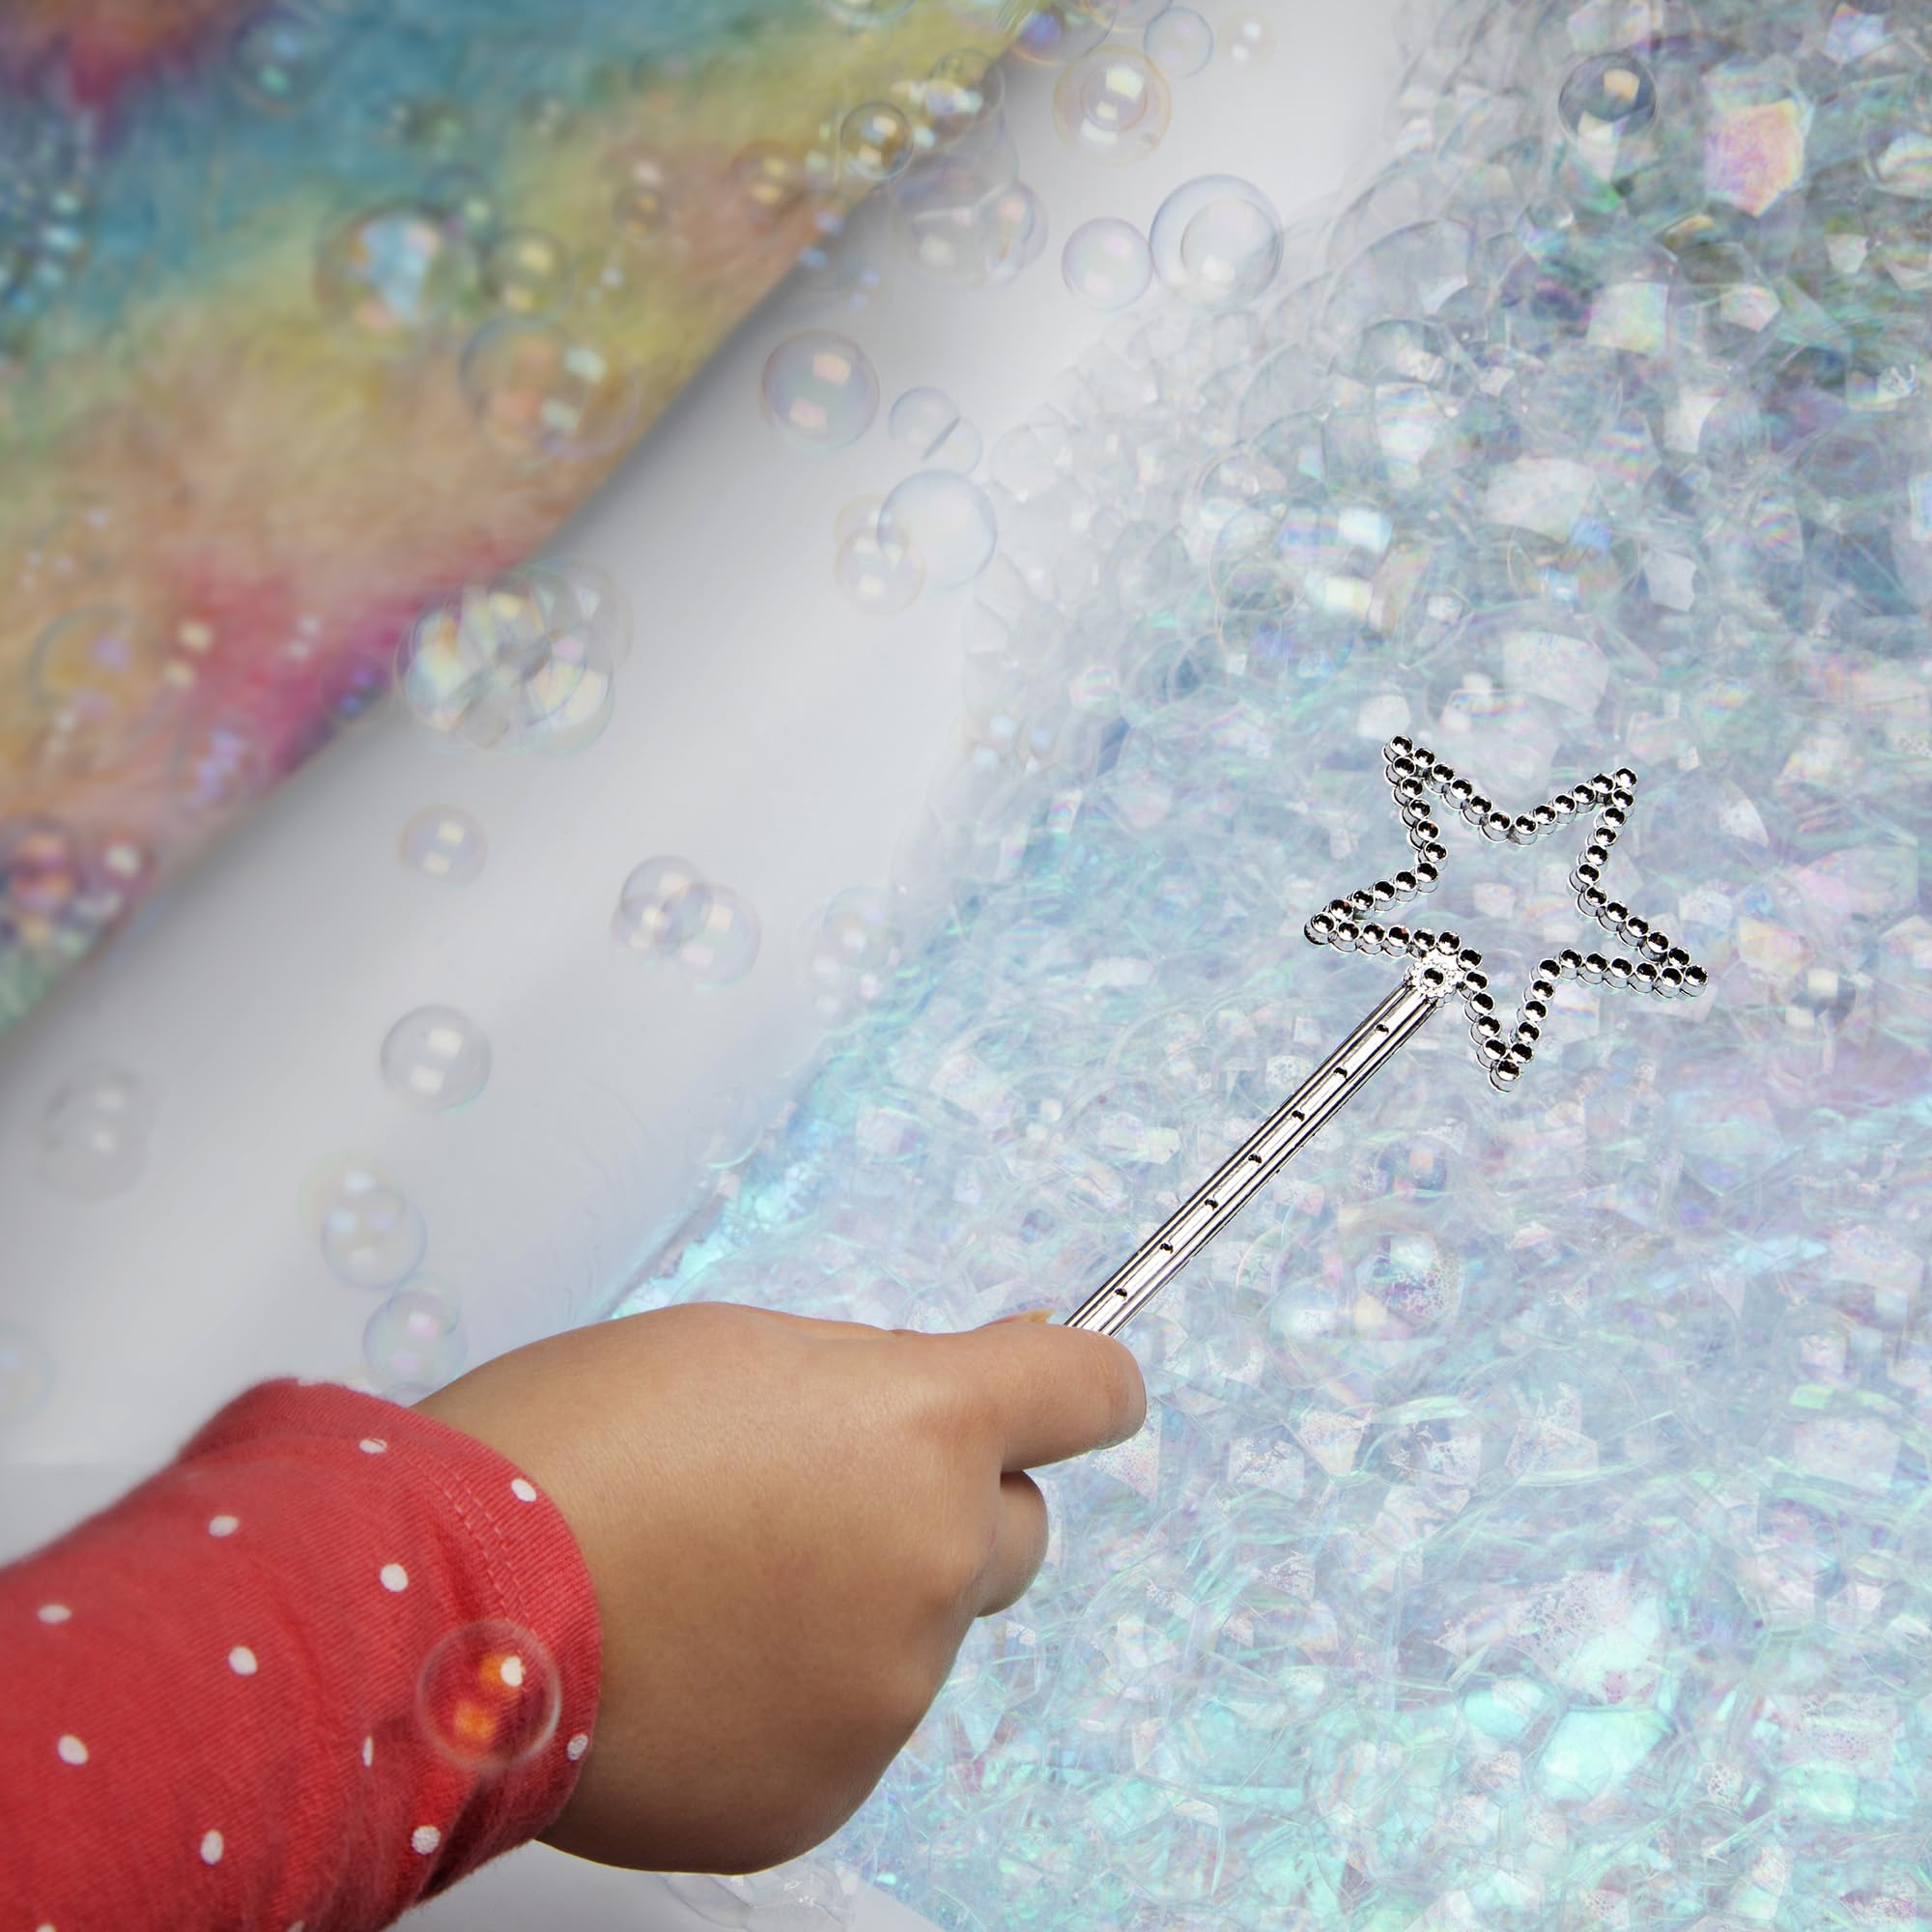 Craft-tastic - Bath Bubble Potions Toy - DIY Bath Tub Water Table Craft - Make Magic Potions and Bubbles in The Bath - for Kids Ages 4 and Up with Help